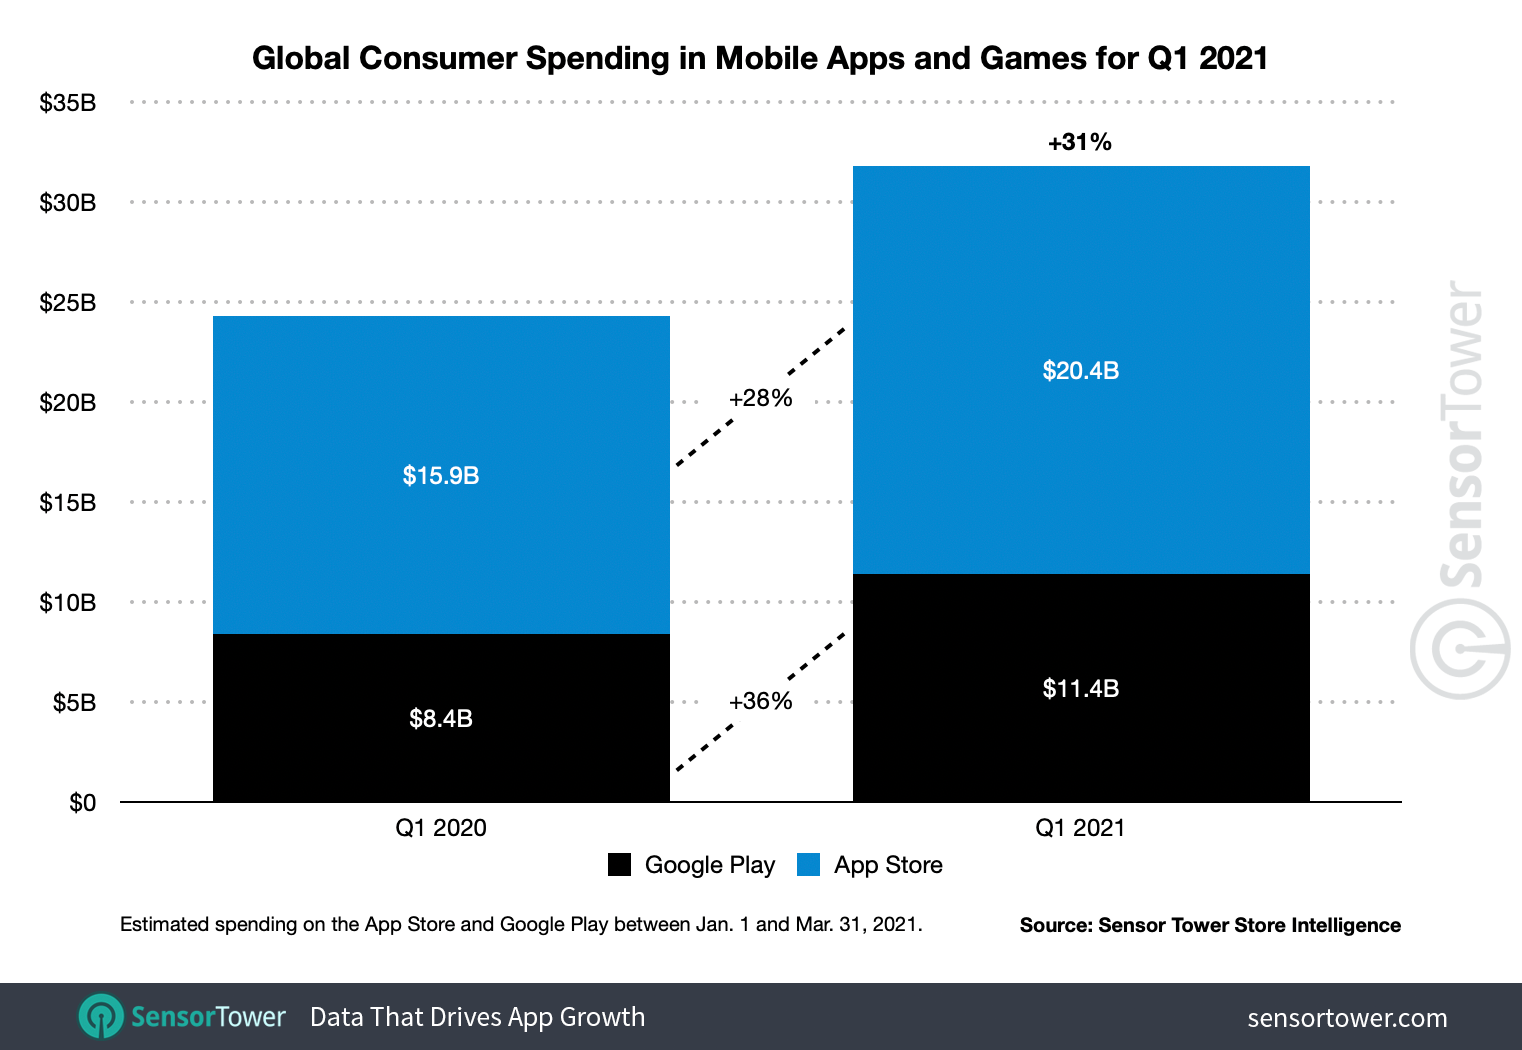 Worldwide consumer spending on apps grew 31 percent year-over-year to $31.8 billion in 1Q21.